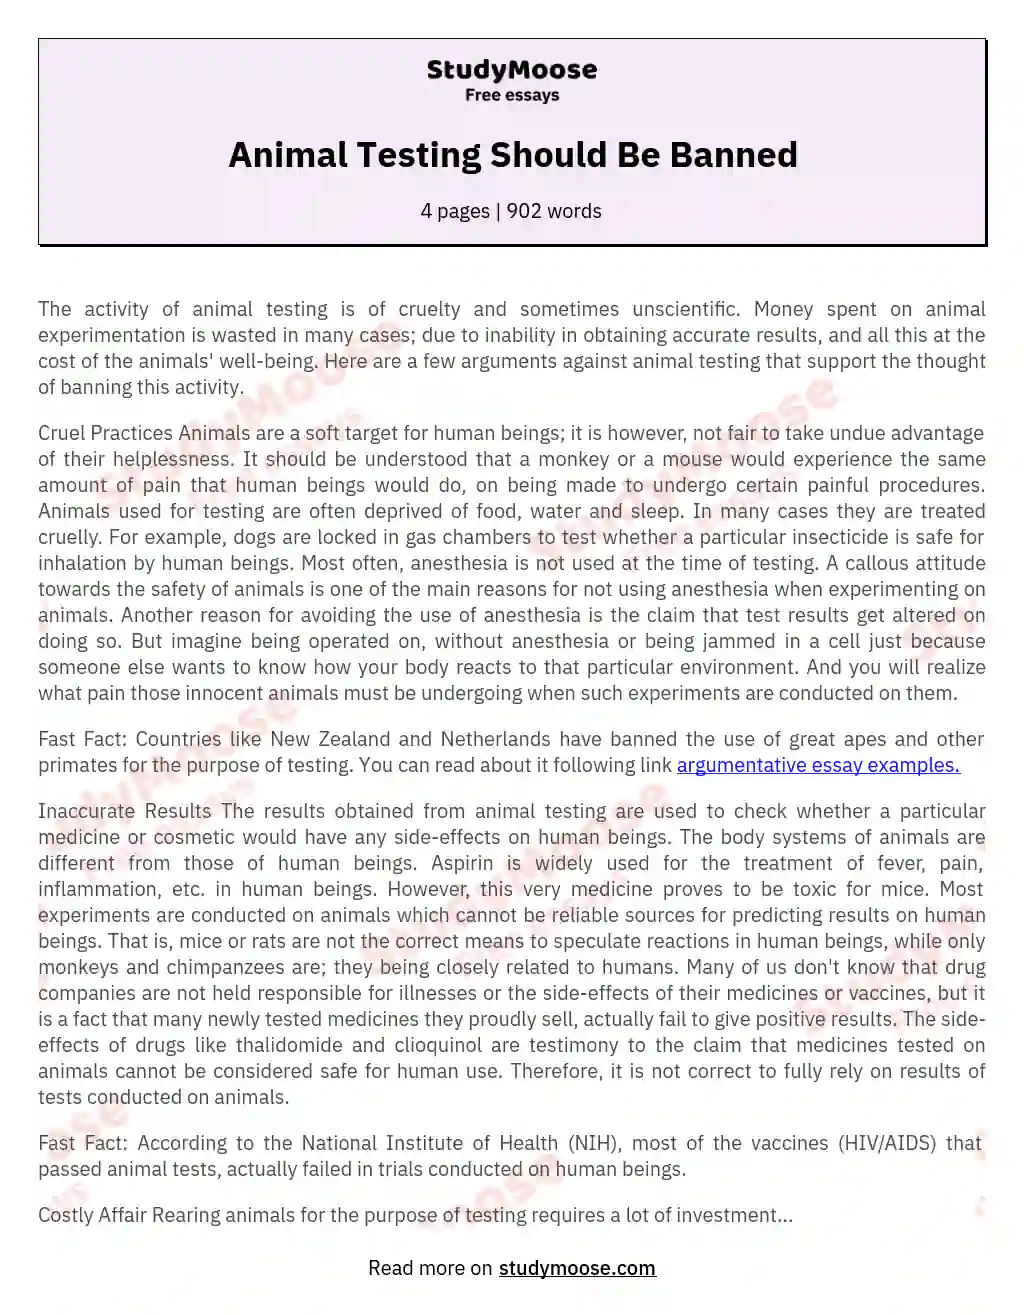 Animal Testing Should Be Banned essay